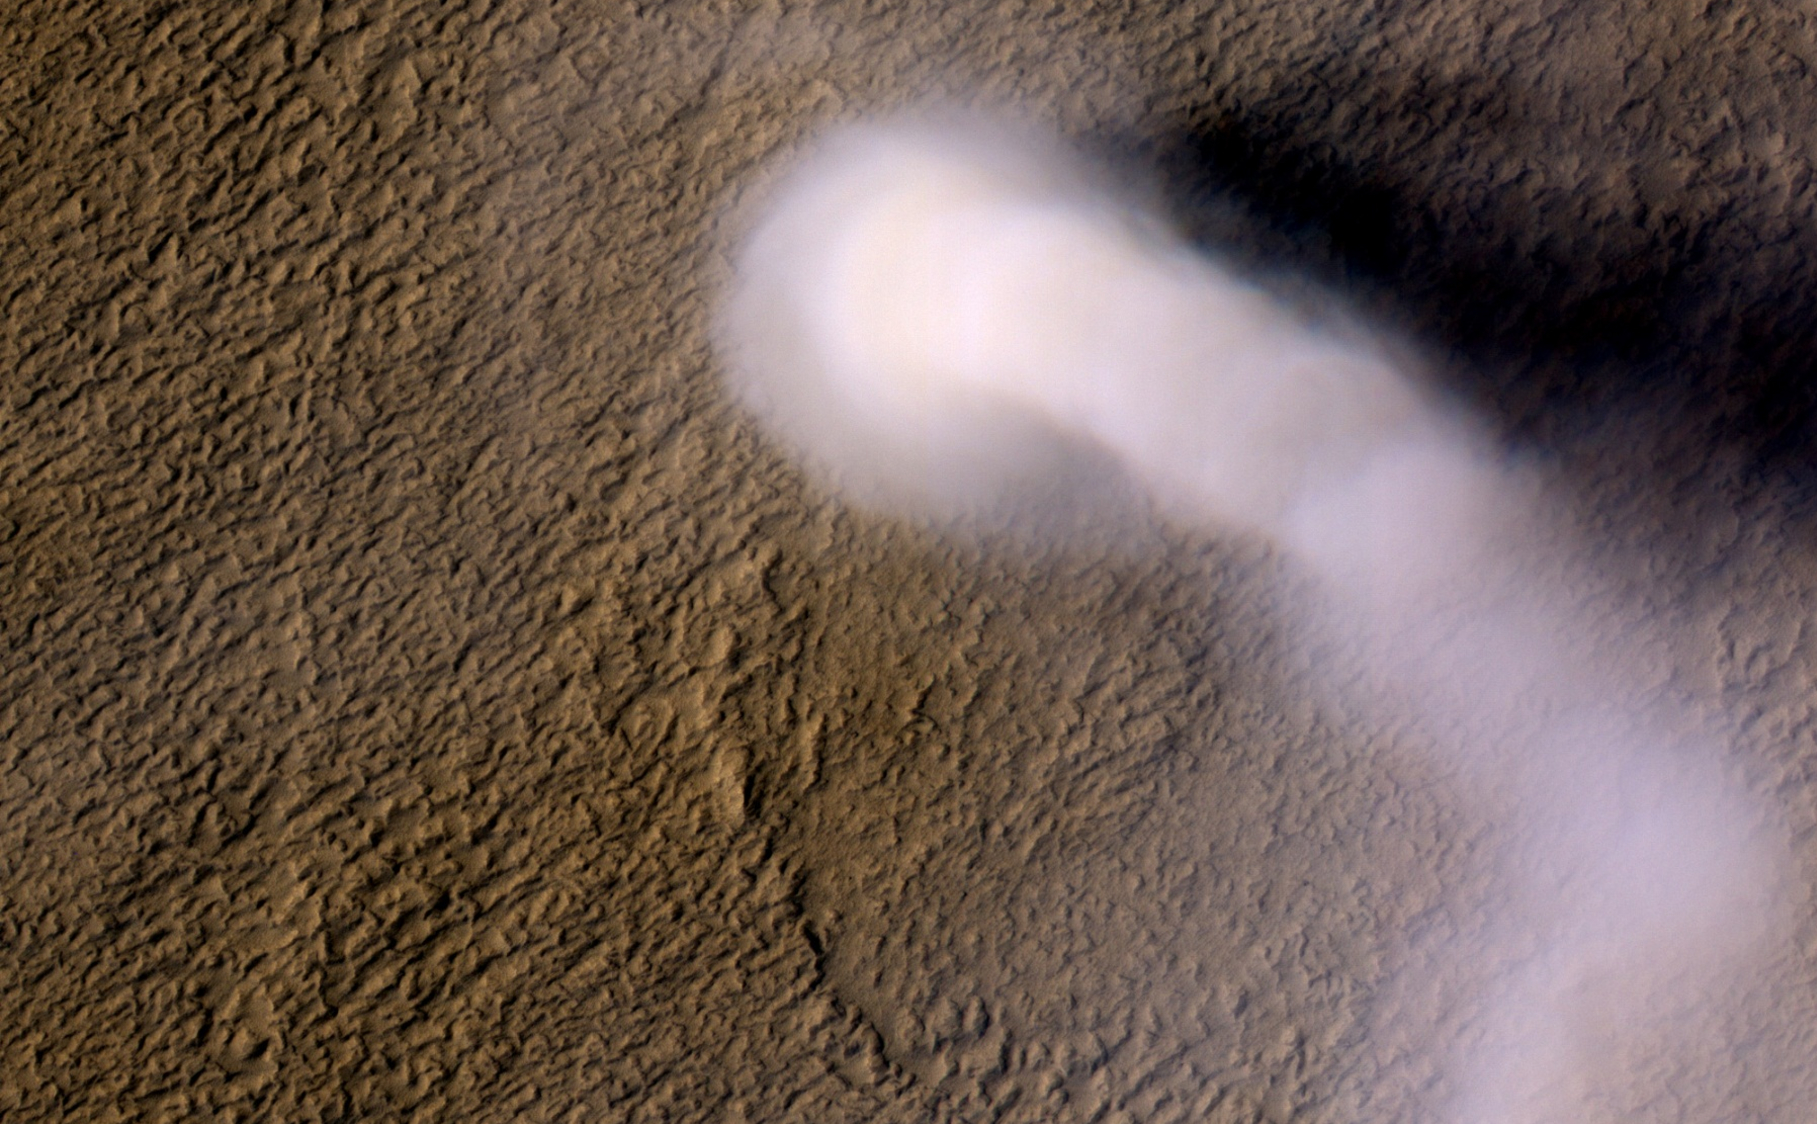 A Martian dust devil roughly 12 miles (20 kilometers) high was captured winding its way along the Amazonis Planitia region of Northern Mars on March 14, 2012 by the High Resolution Imaging Science Experiment (HiRISE) camera on NASA's Mars Reconnaissance Orbiter.